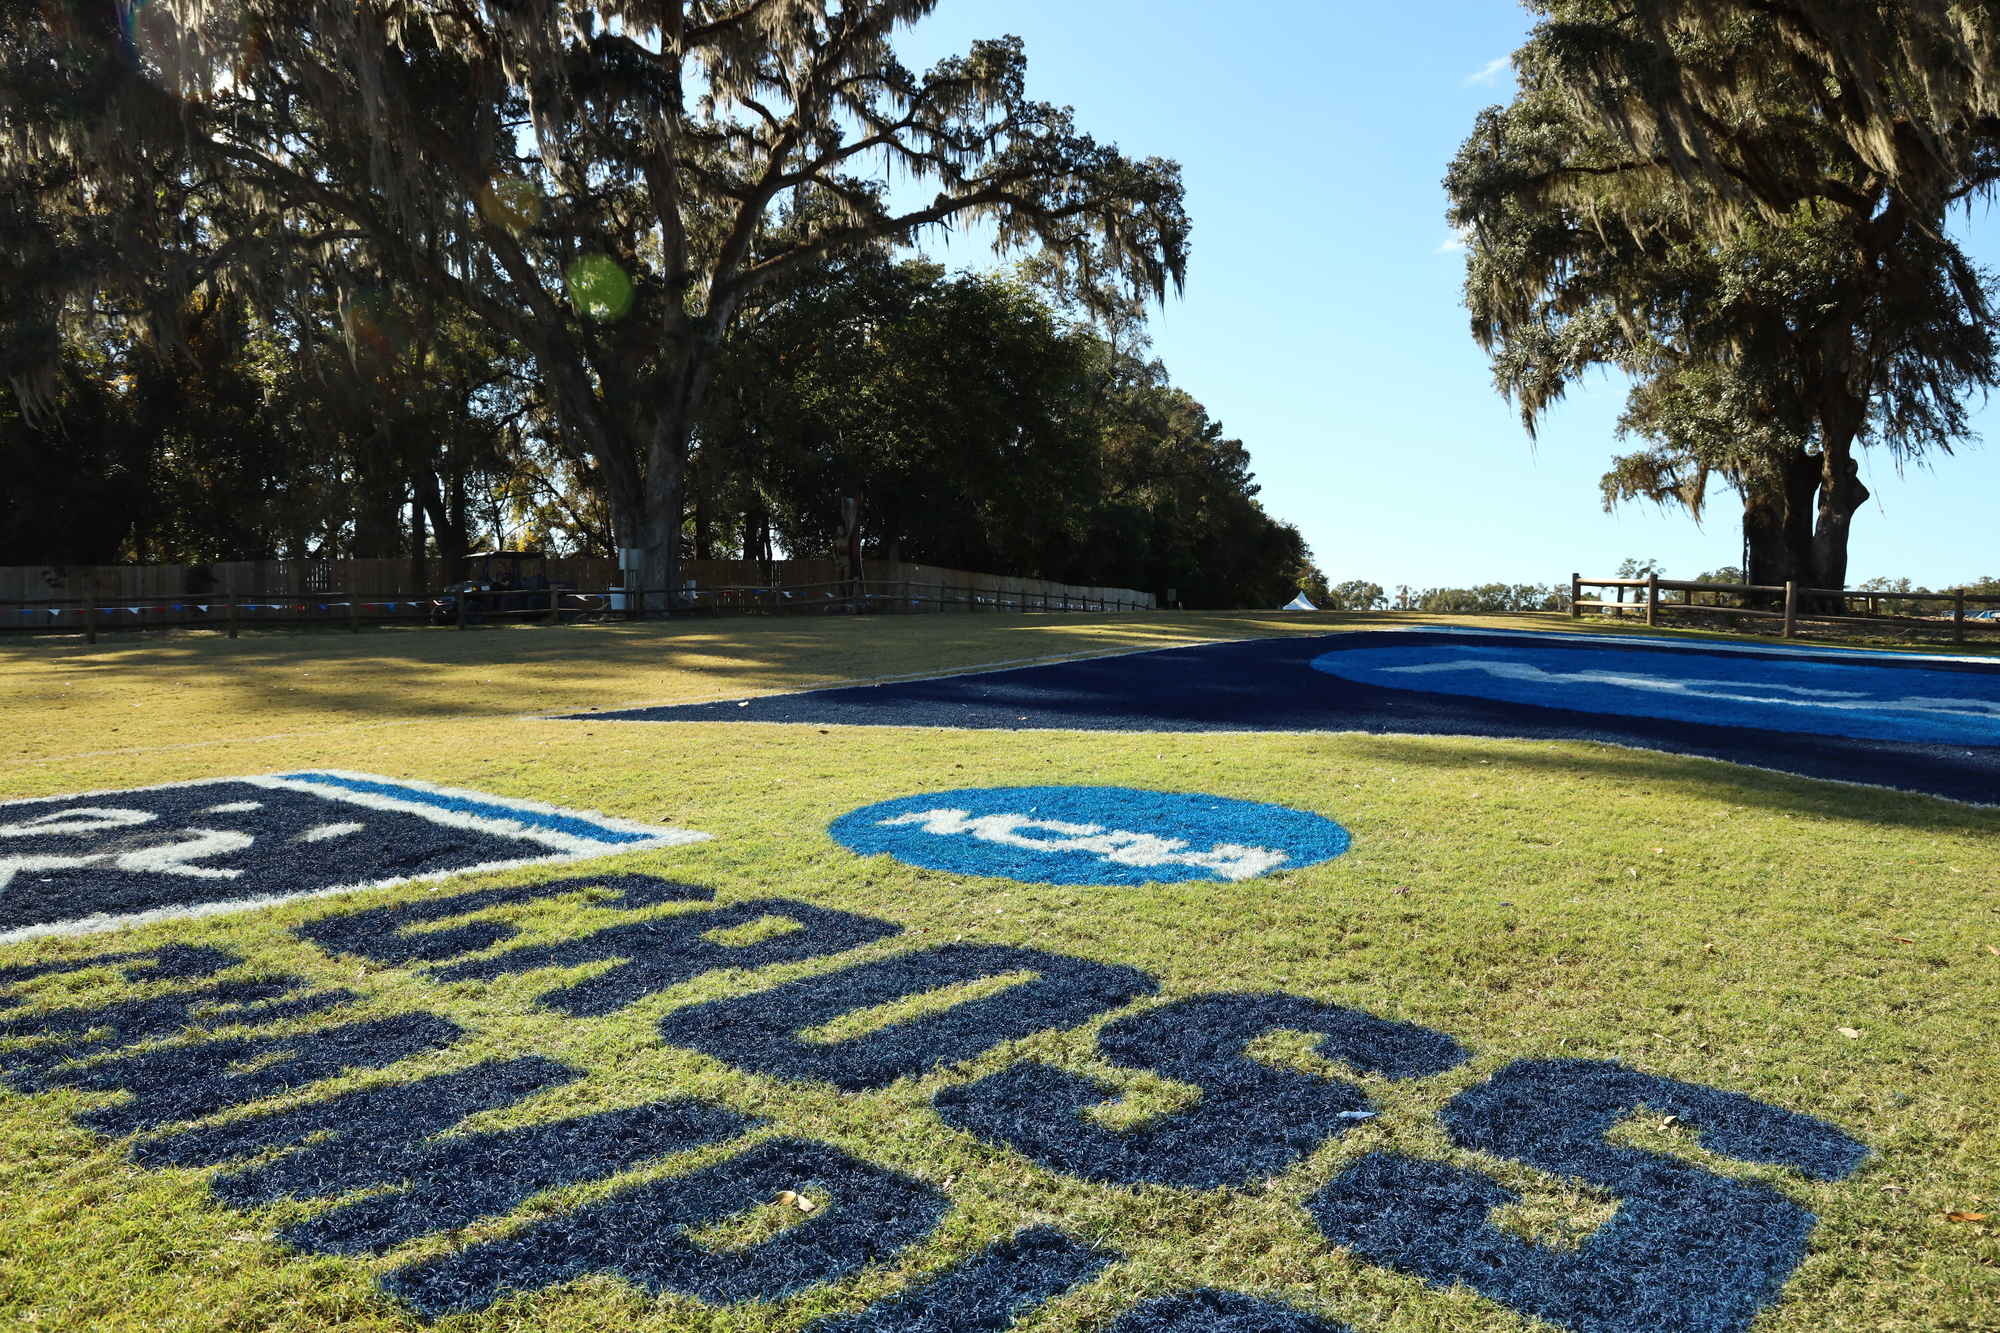 NCAA Cross Country imagery painted onto the course at Apalachee Regional Park